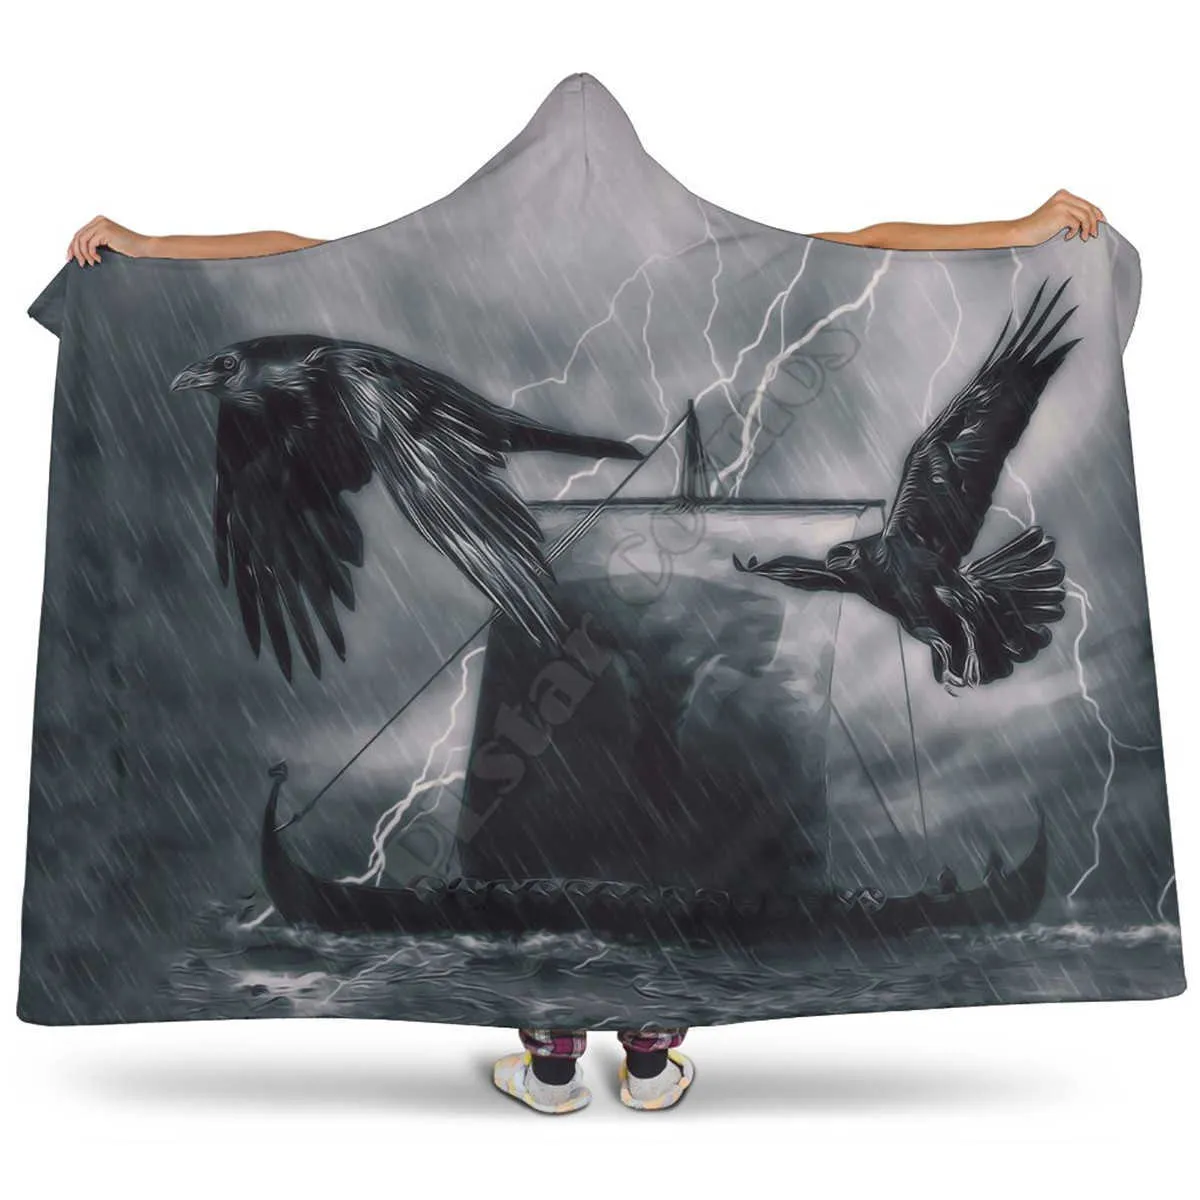 Viking tattoo Character Hooded Blanket Adult colorful child Sherpa Fleece Wearable Blanket Microfiber Bedding style2 2110198175846